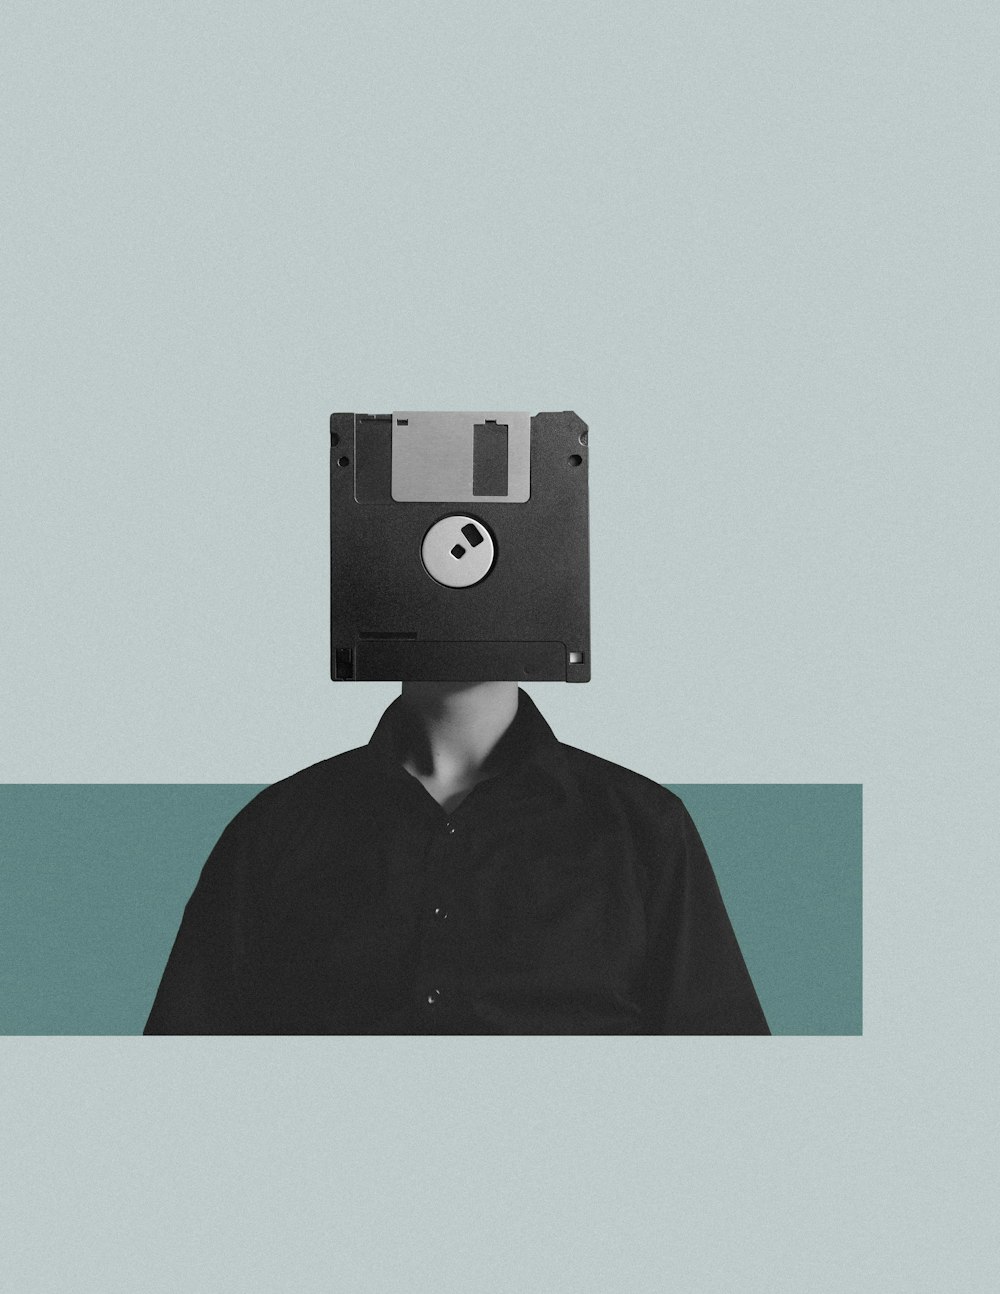 a man with a floppy head and a floppy disk on his head